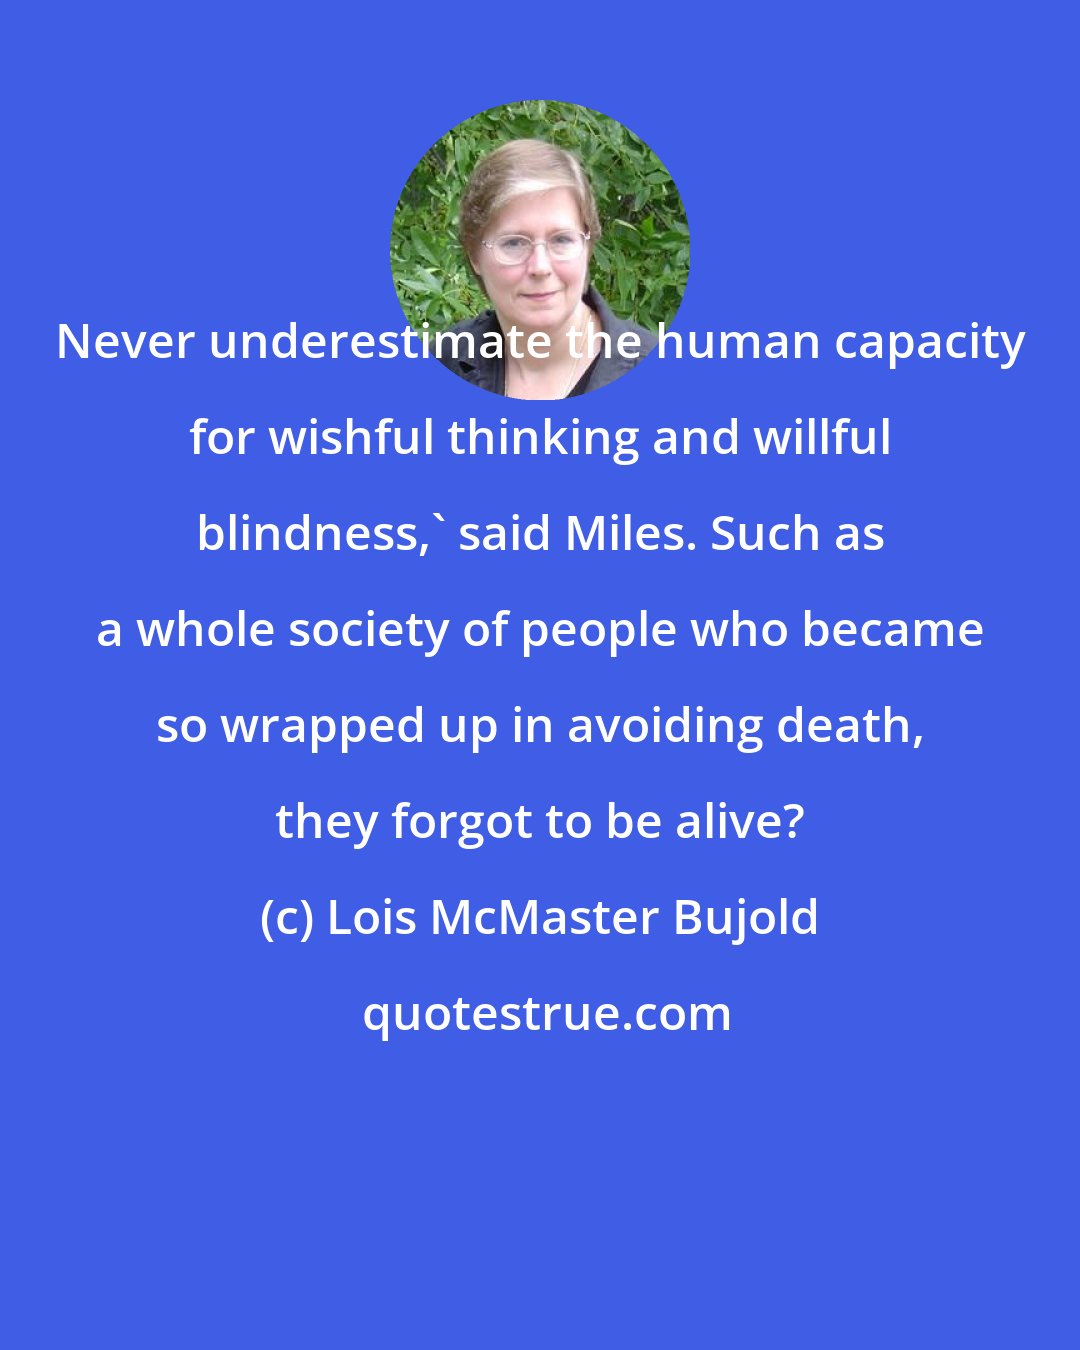 Lois McMaster Bujold: Never underestimate the human capacity for wishful thinking and willful blindness,' said Miles. Such as a whole society of people who became so wrapped up in avoiding death, they forgot to be alive?